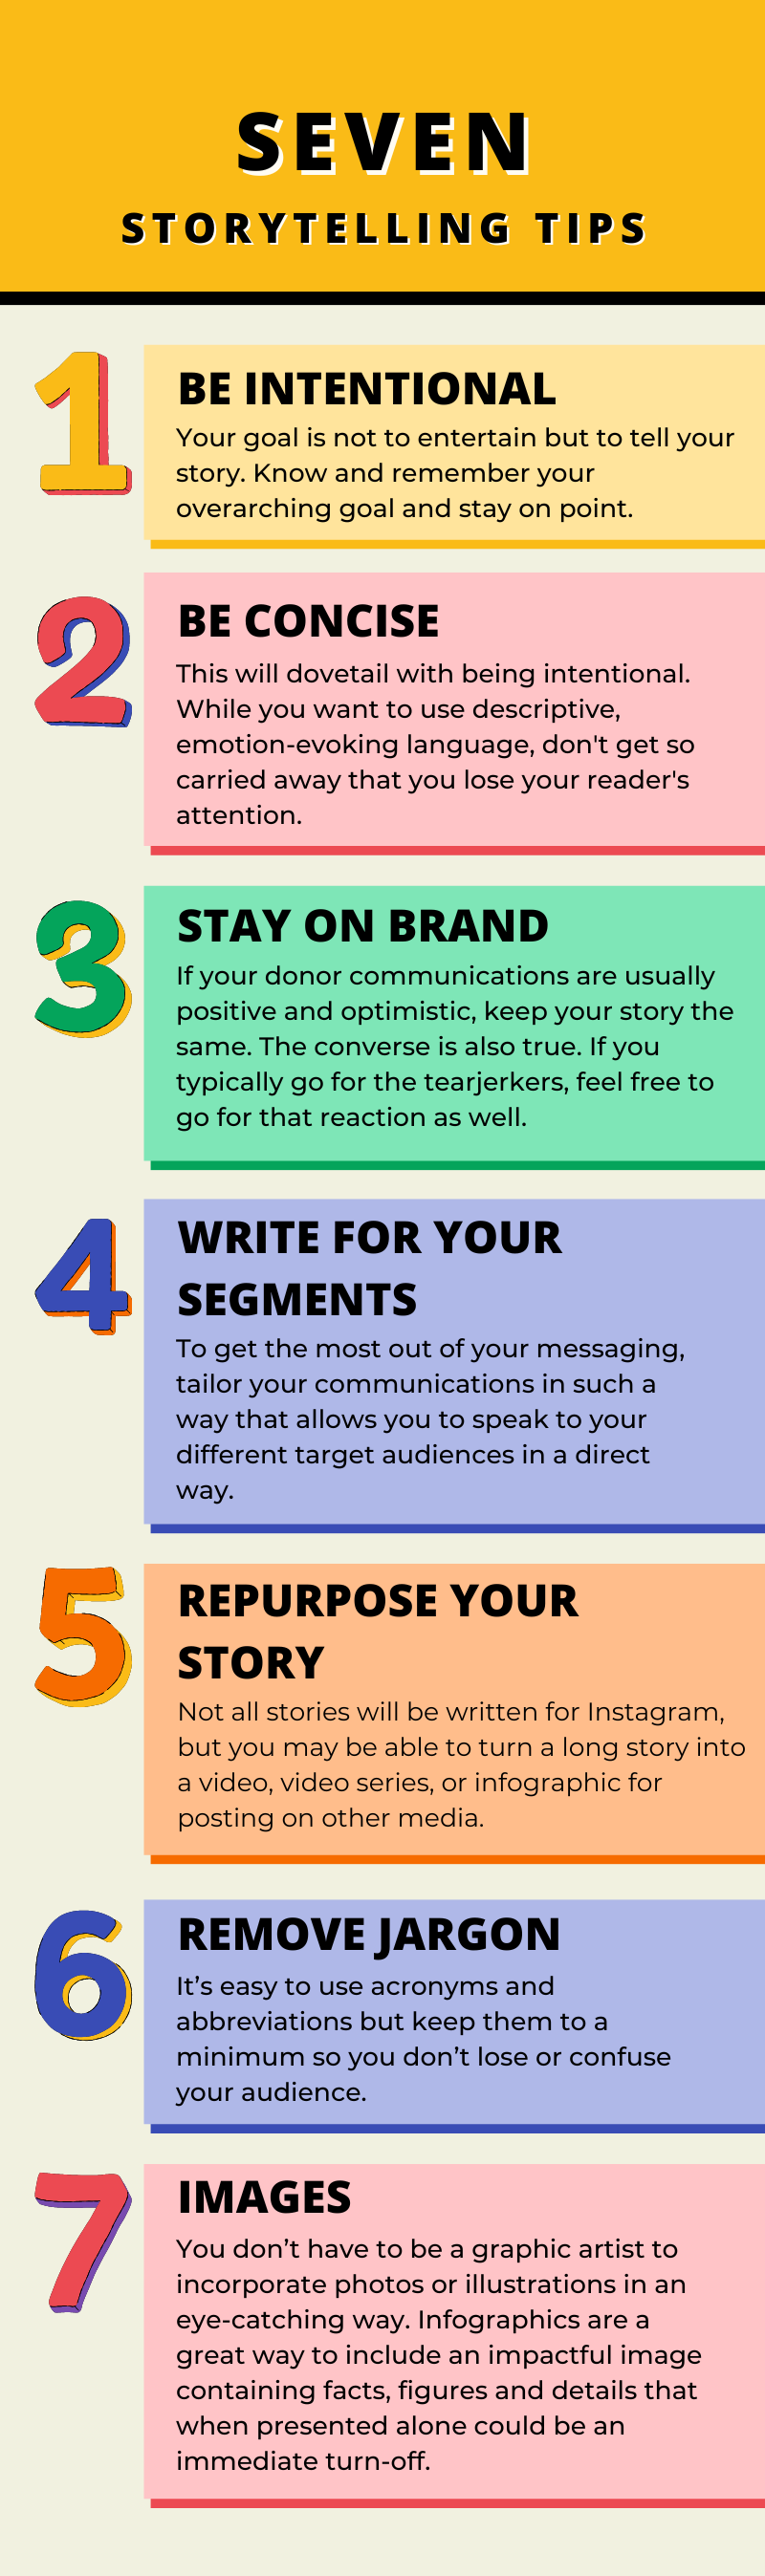 7 tips infographic